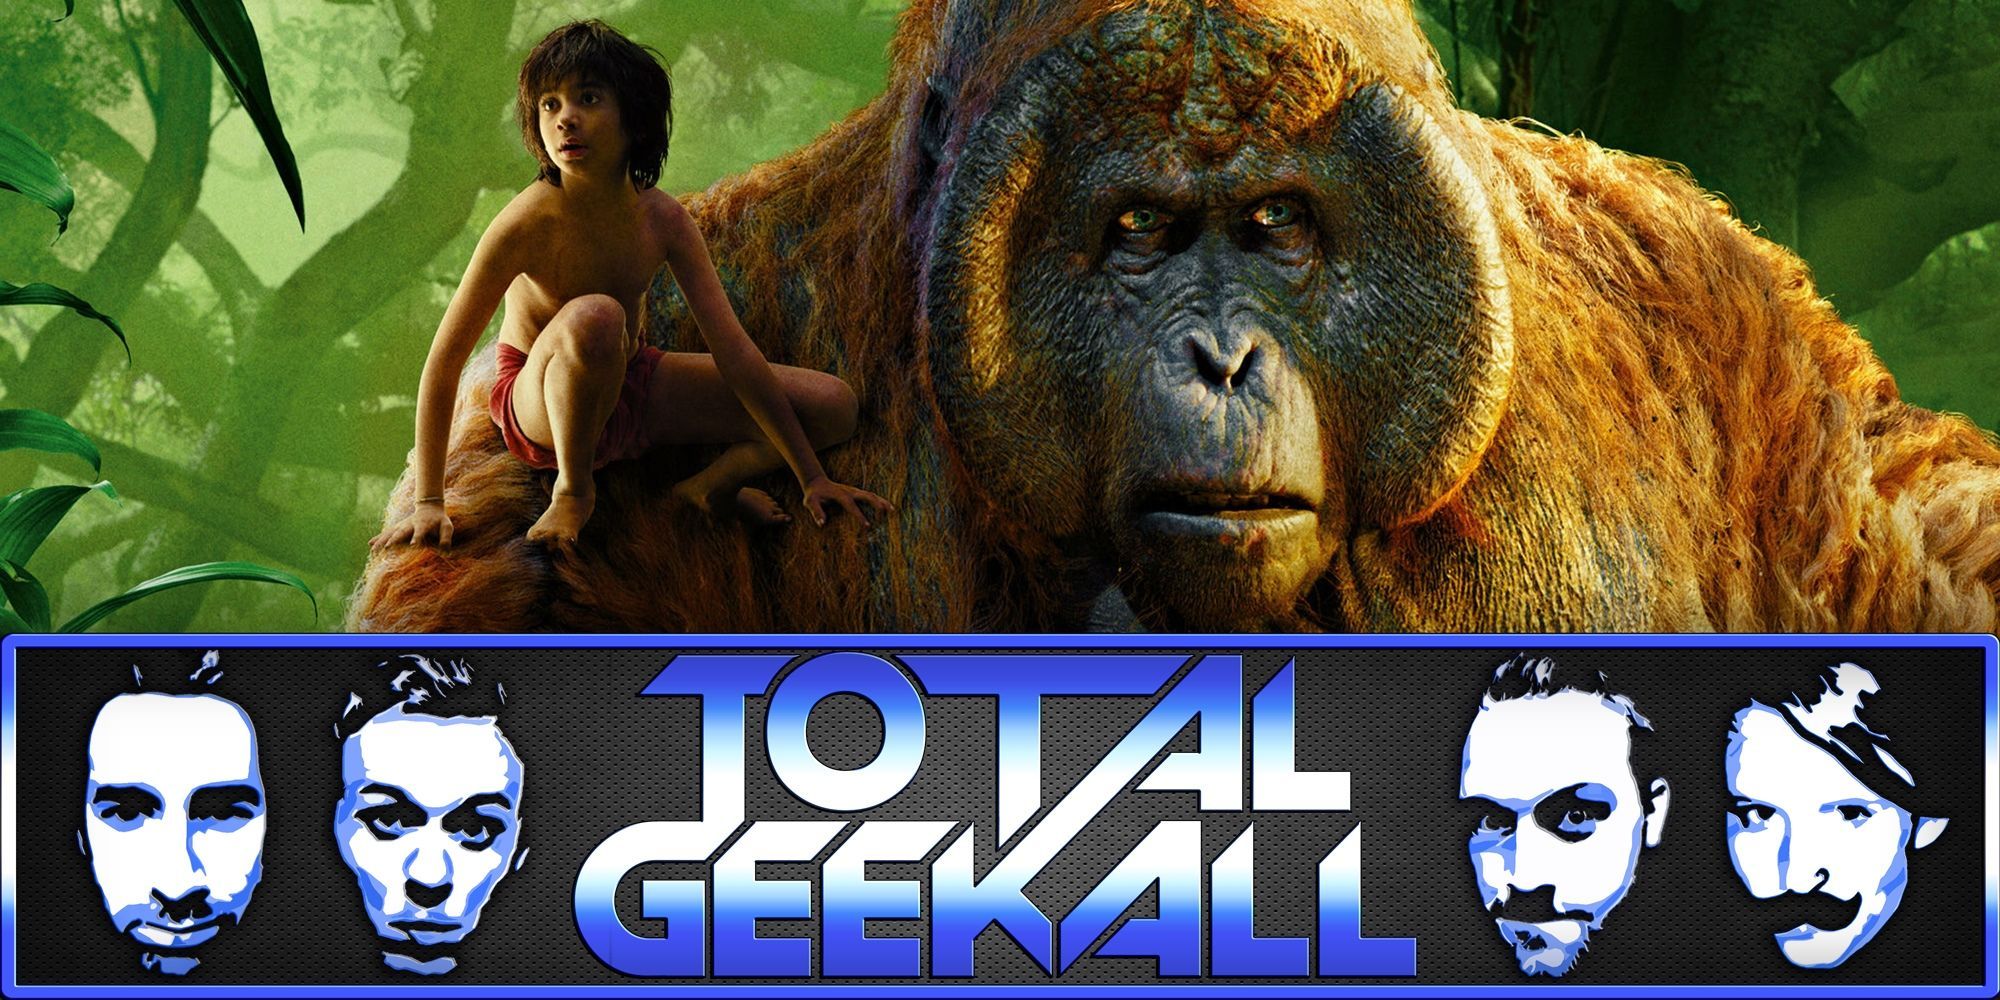 The Jungle Book Review – Total Geekall #13